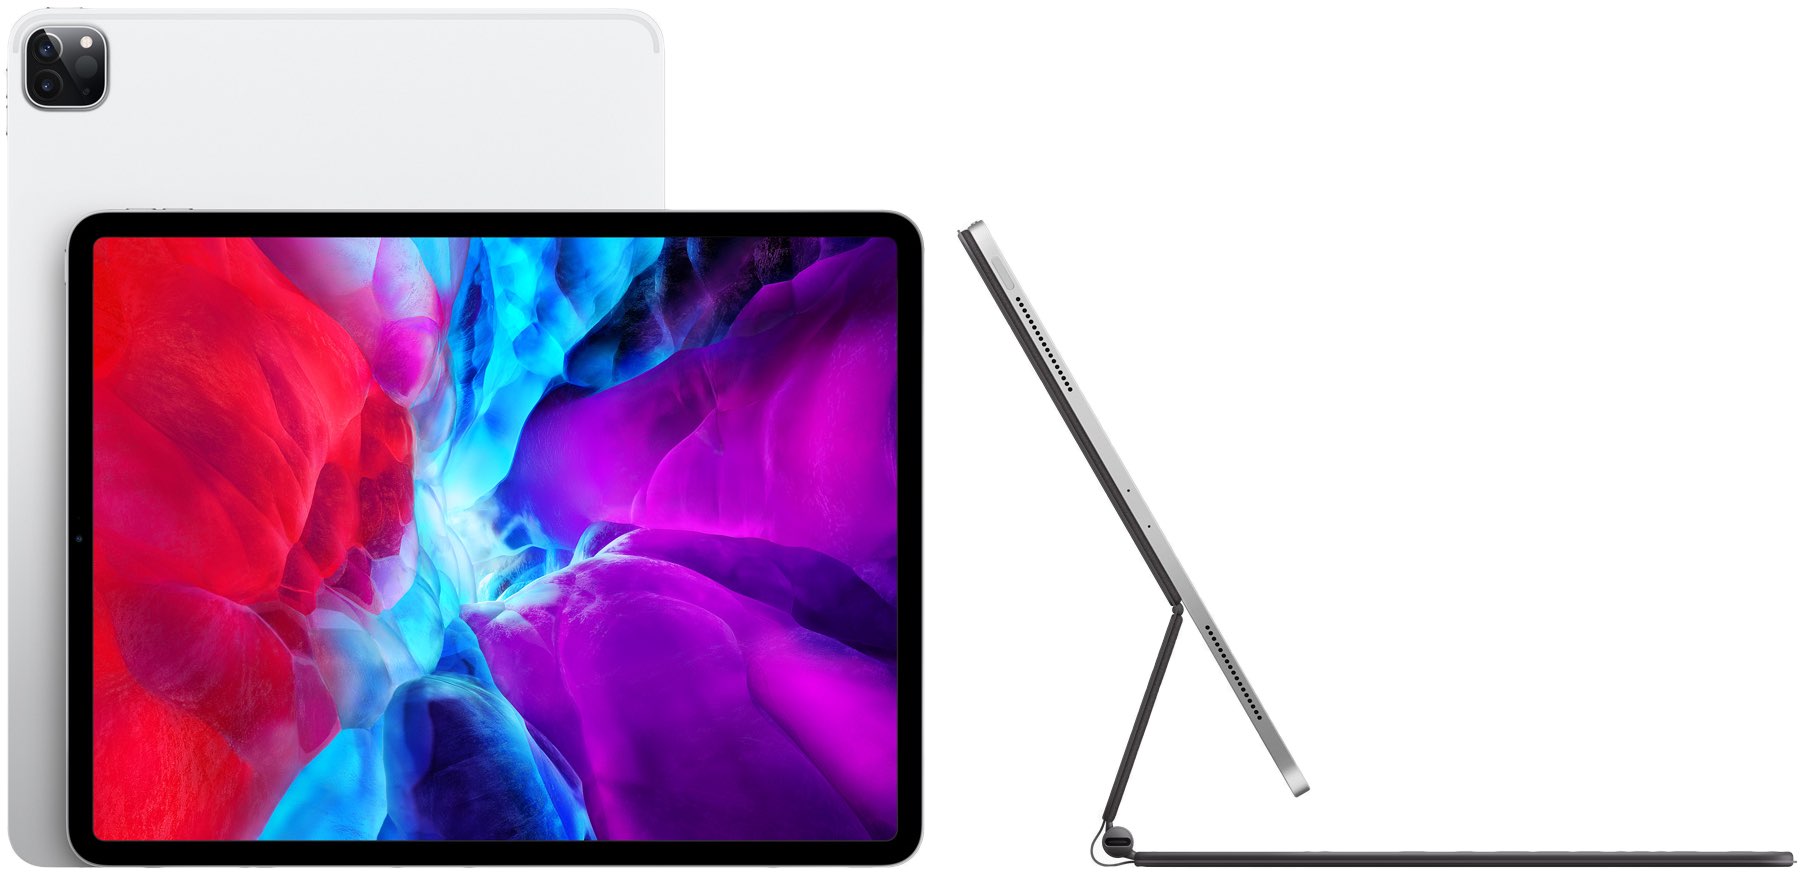 Technical specifications for the 2020 iPad Pro